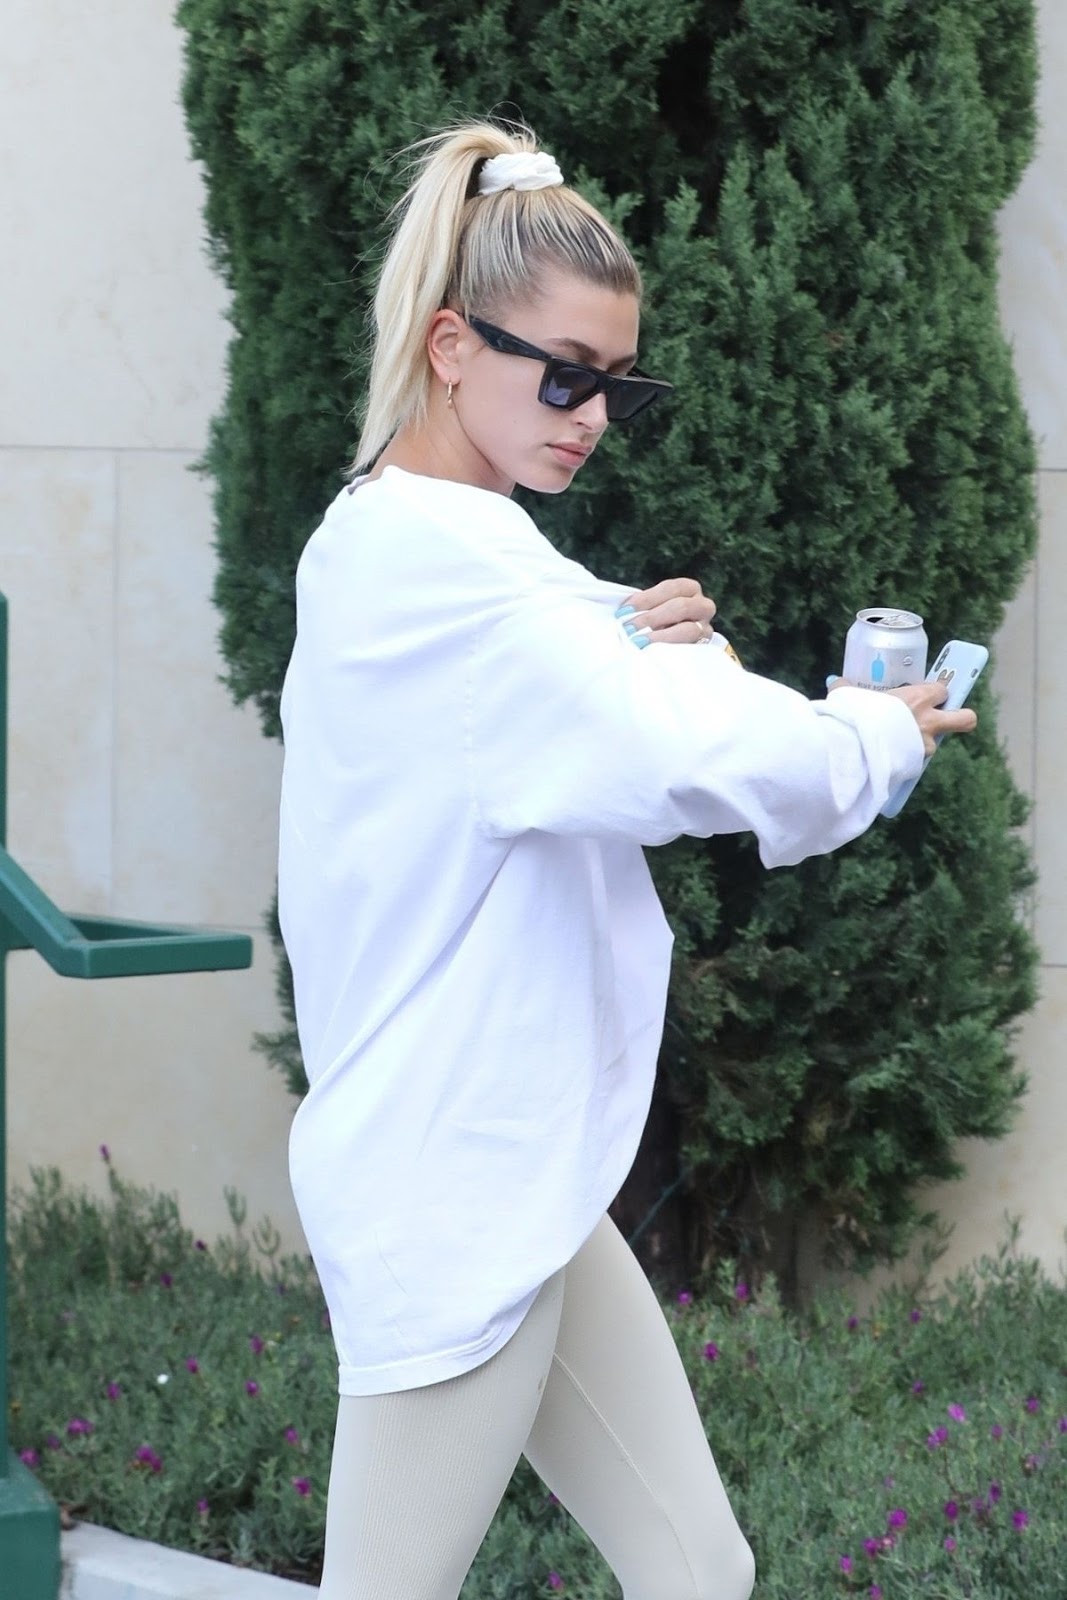 Hailey Bieber Heading to Pilates Class in West Hollywood 6 Aug-2019